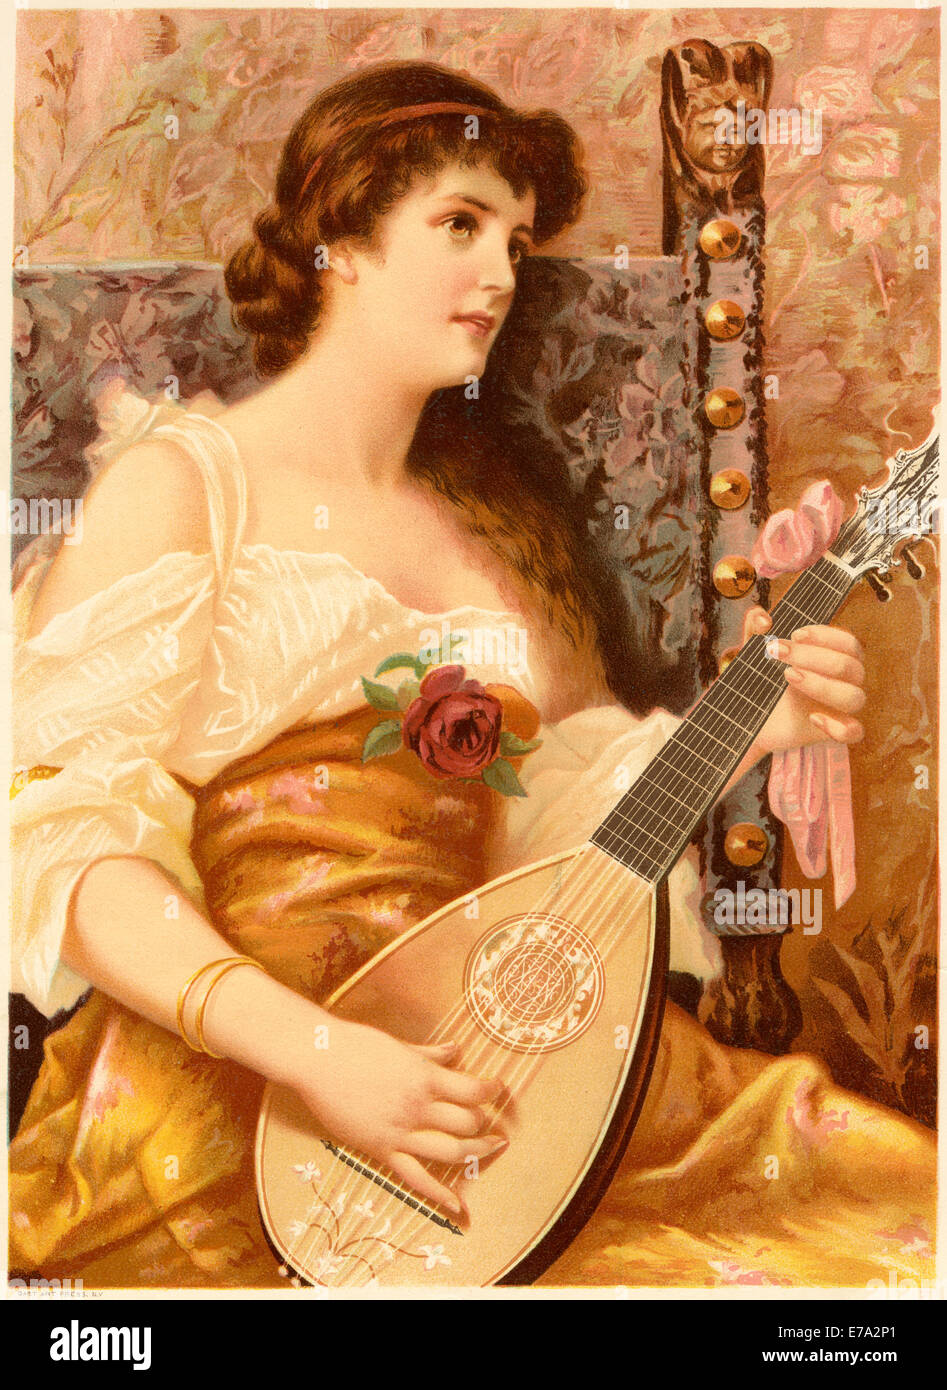 Woman Playing Guitar, 'The Old Song', 1891 Stock Photo